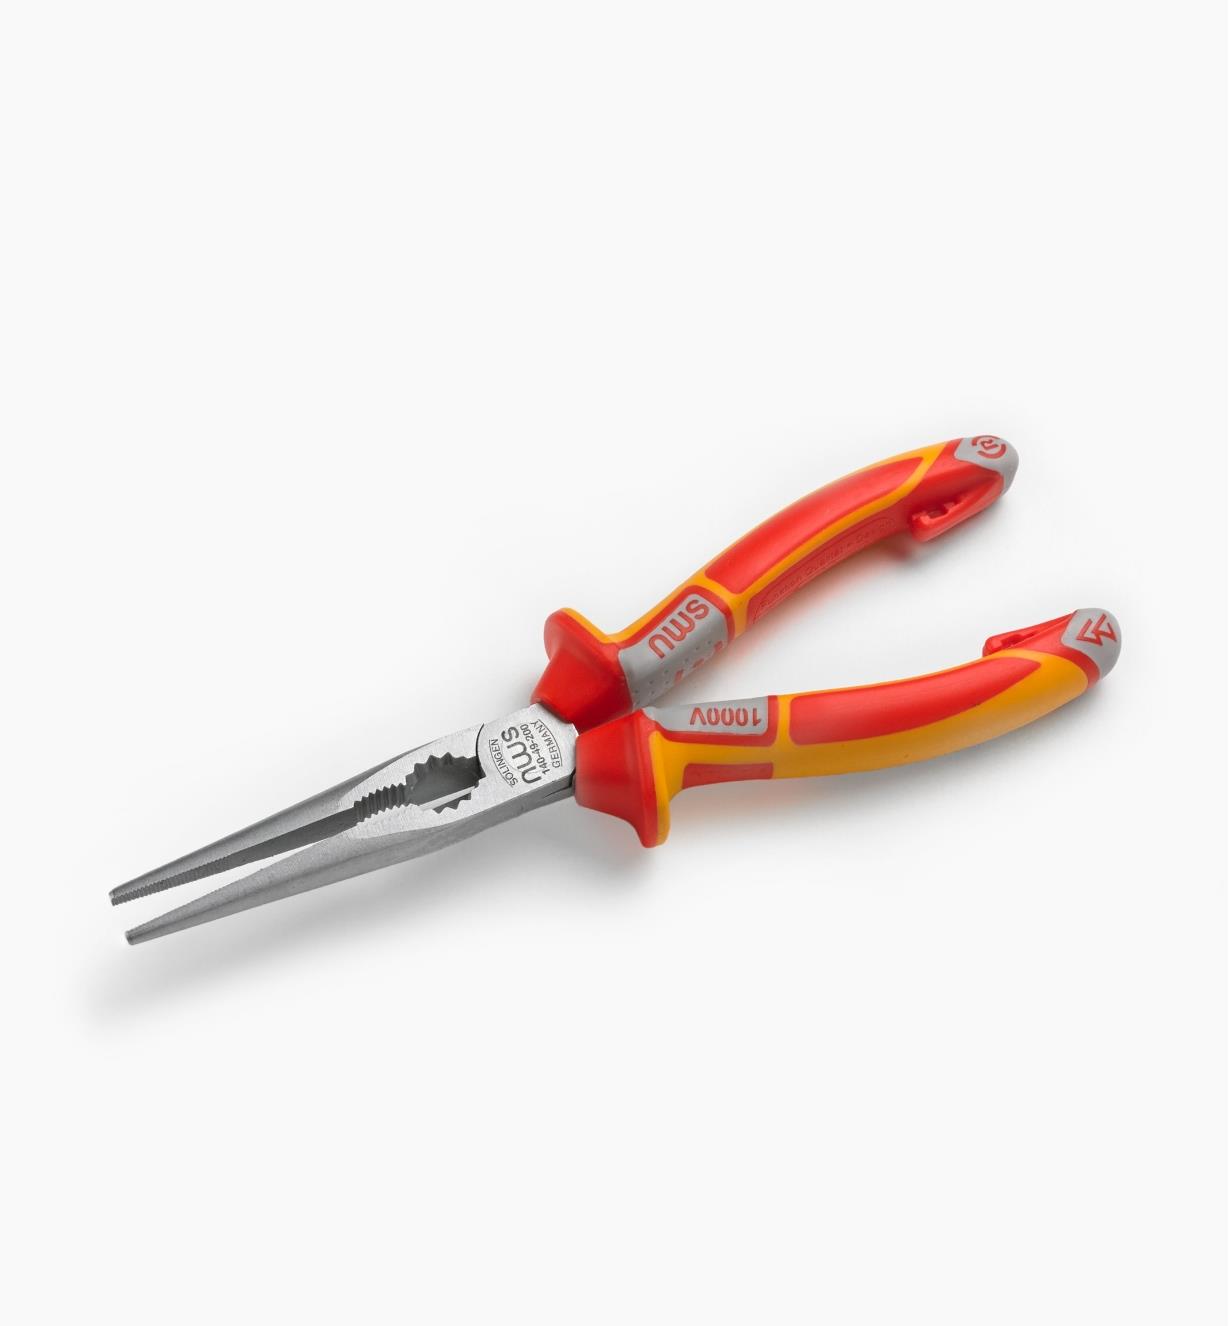 24K2206 - NWS Insulated (1000V) Needle-Nose Pliers, Straight